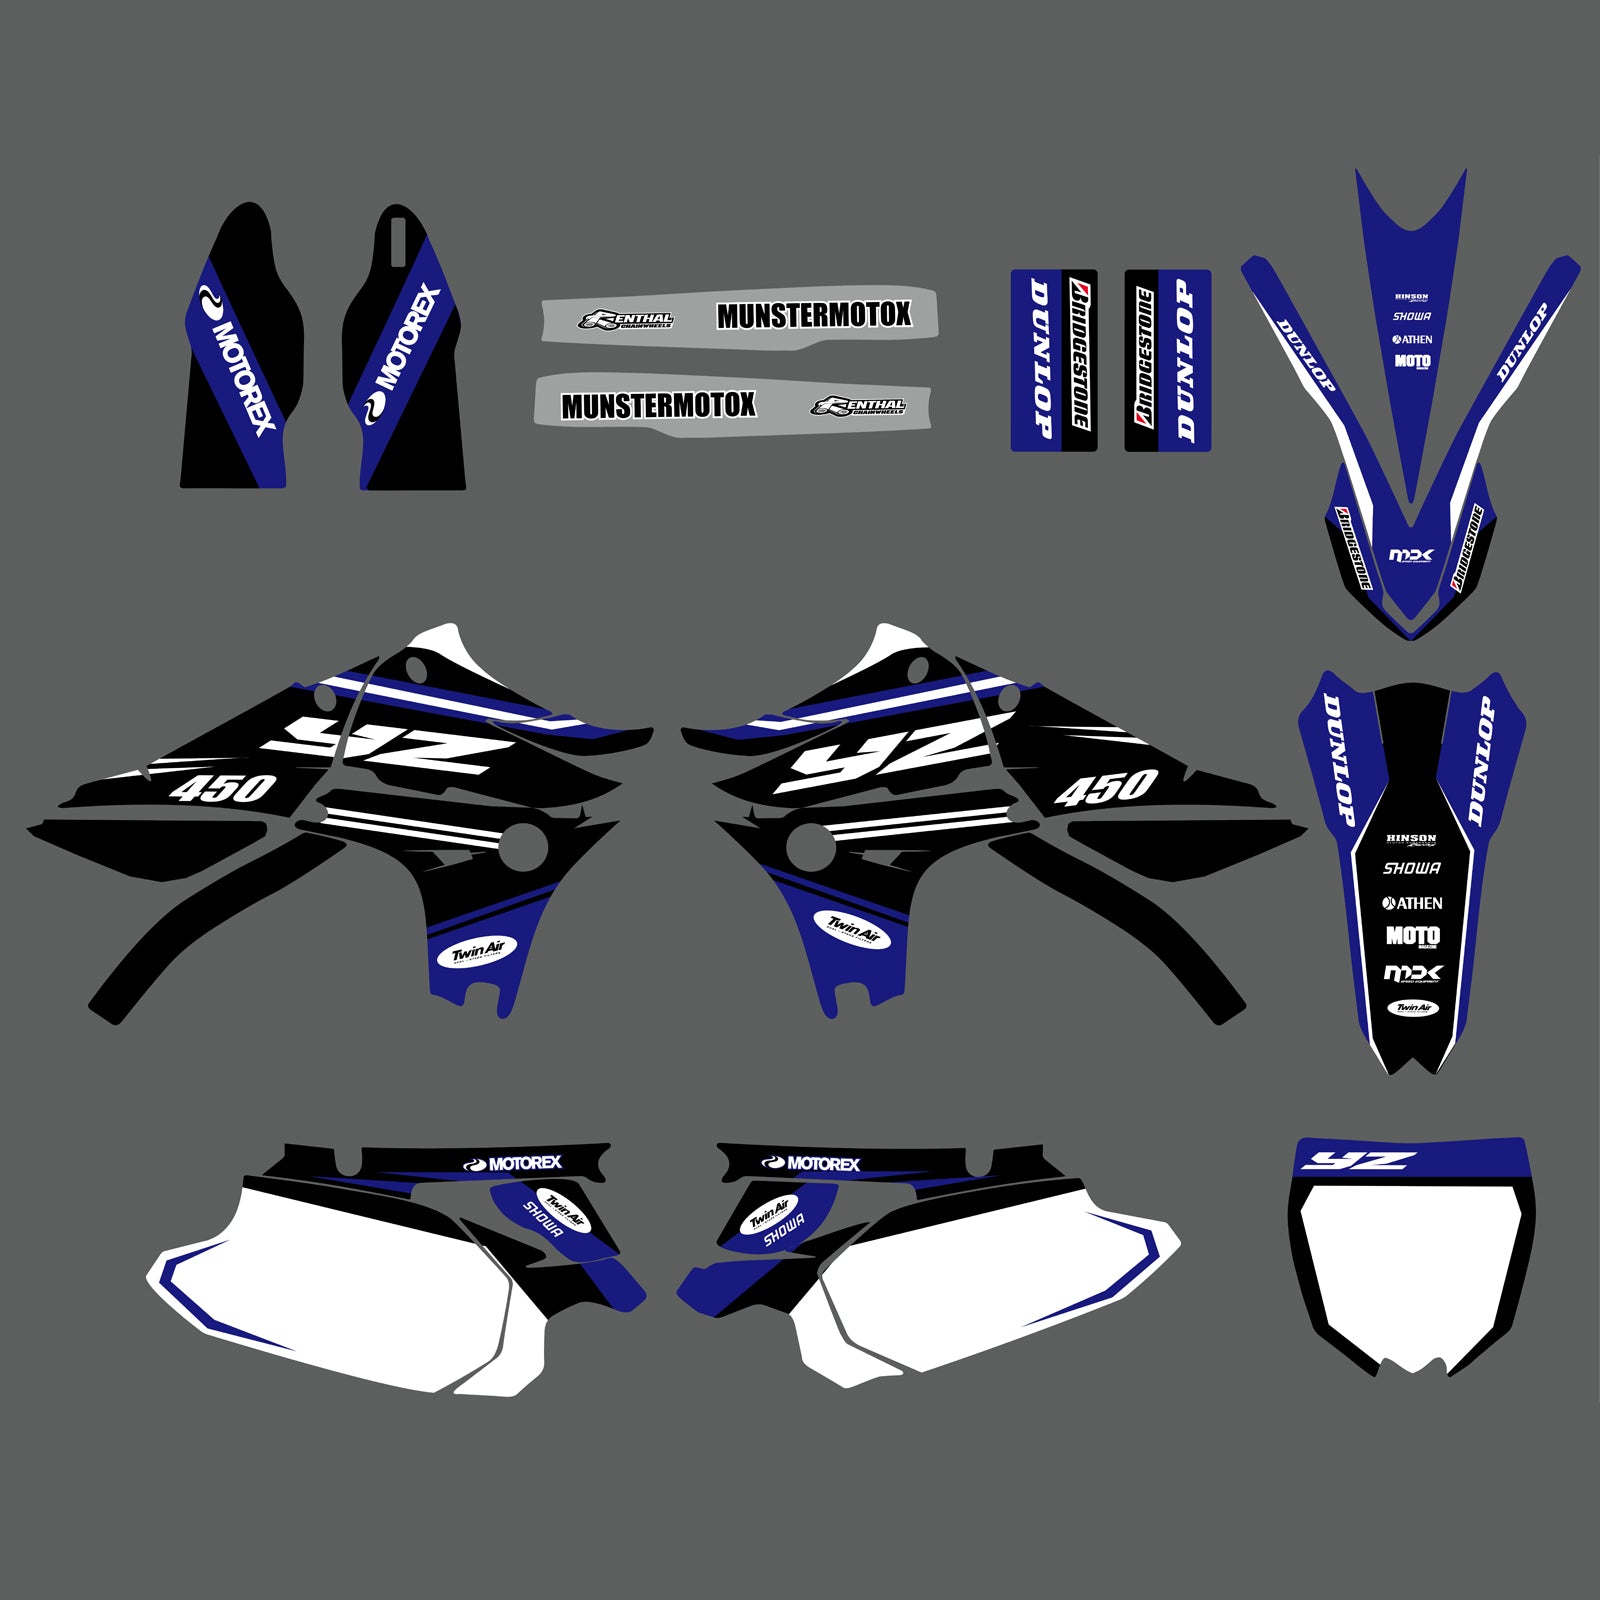 New Style Stickers Kits for Yamaha YZ450F YZF450 2010 2011 2012 2013